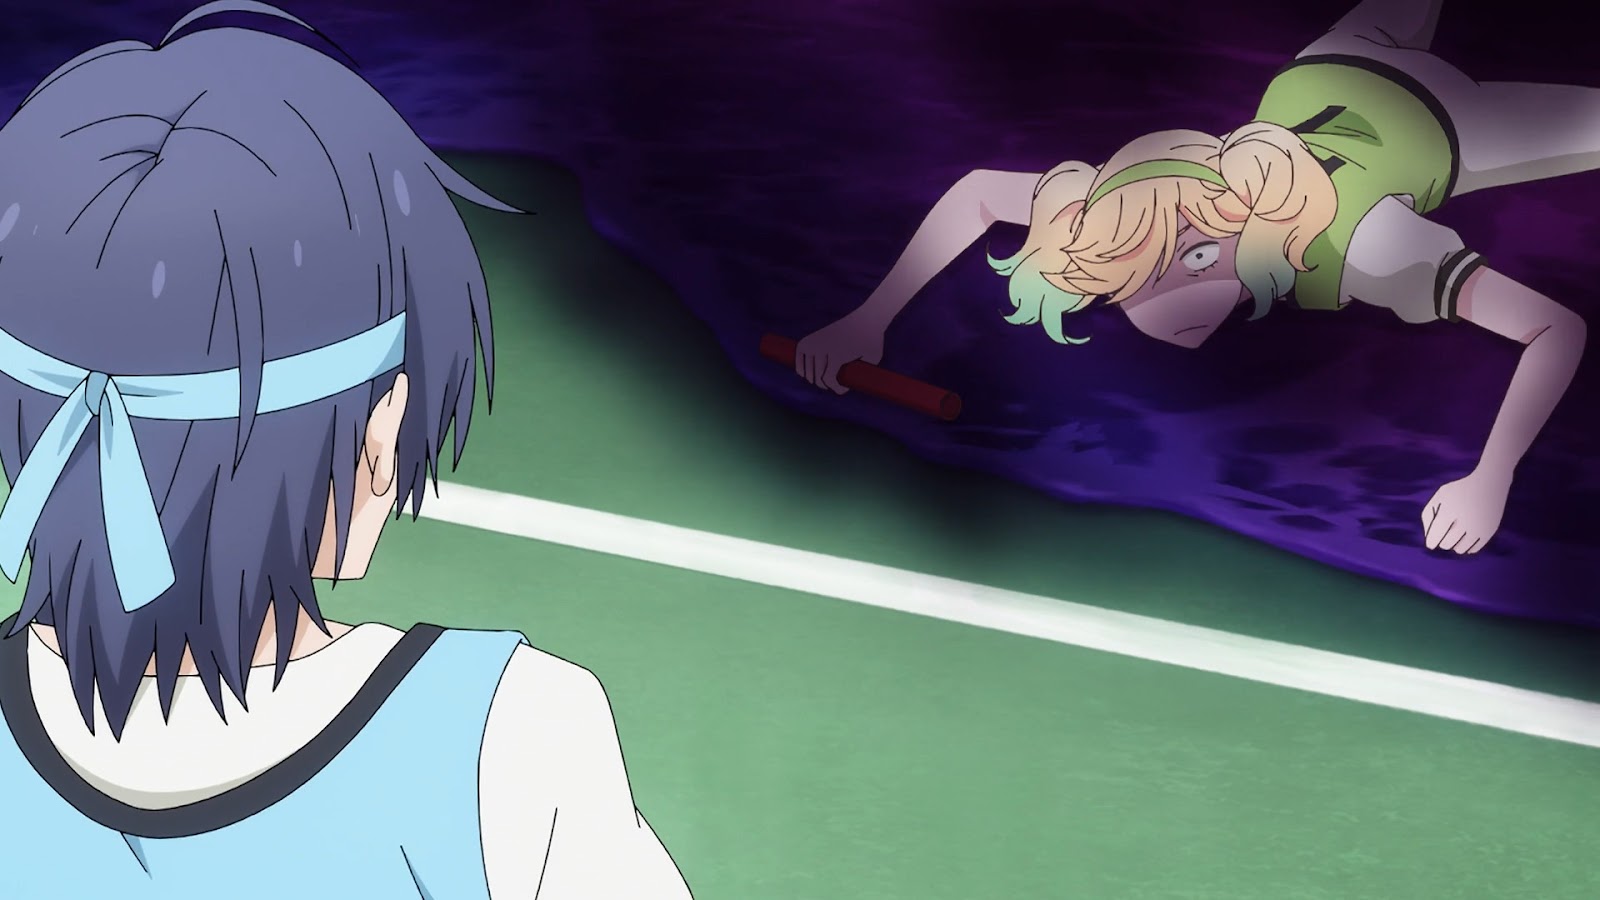 Comedic shot of Ai watching Sarasa on the ground, where she seems trapped in some kind of miasma. They’re dressed for gym class.